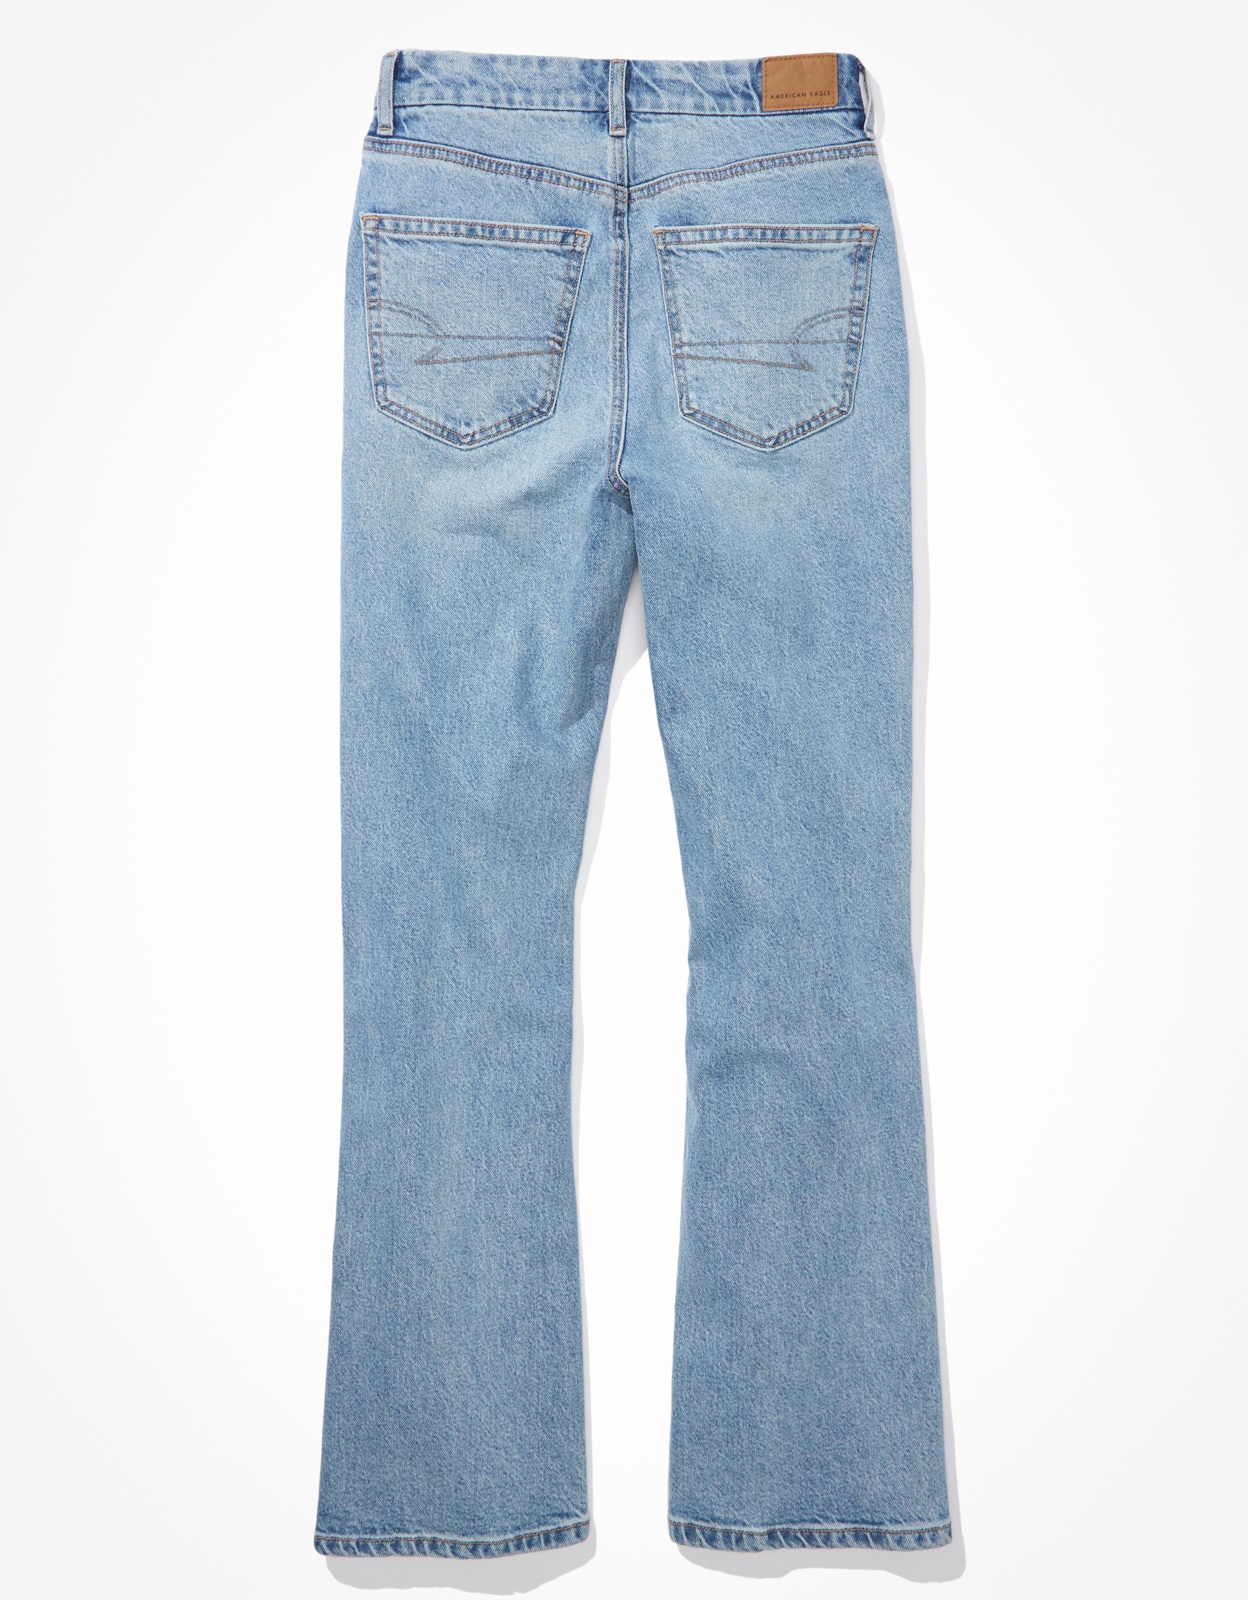 Shop AE Stretch Curvy '90s Bootcut Jean online | American Eagle Outfitters